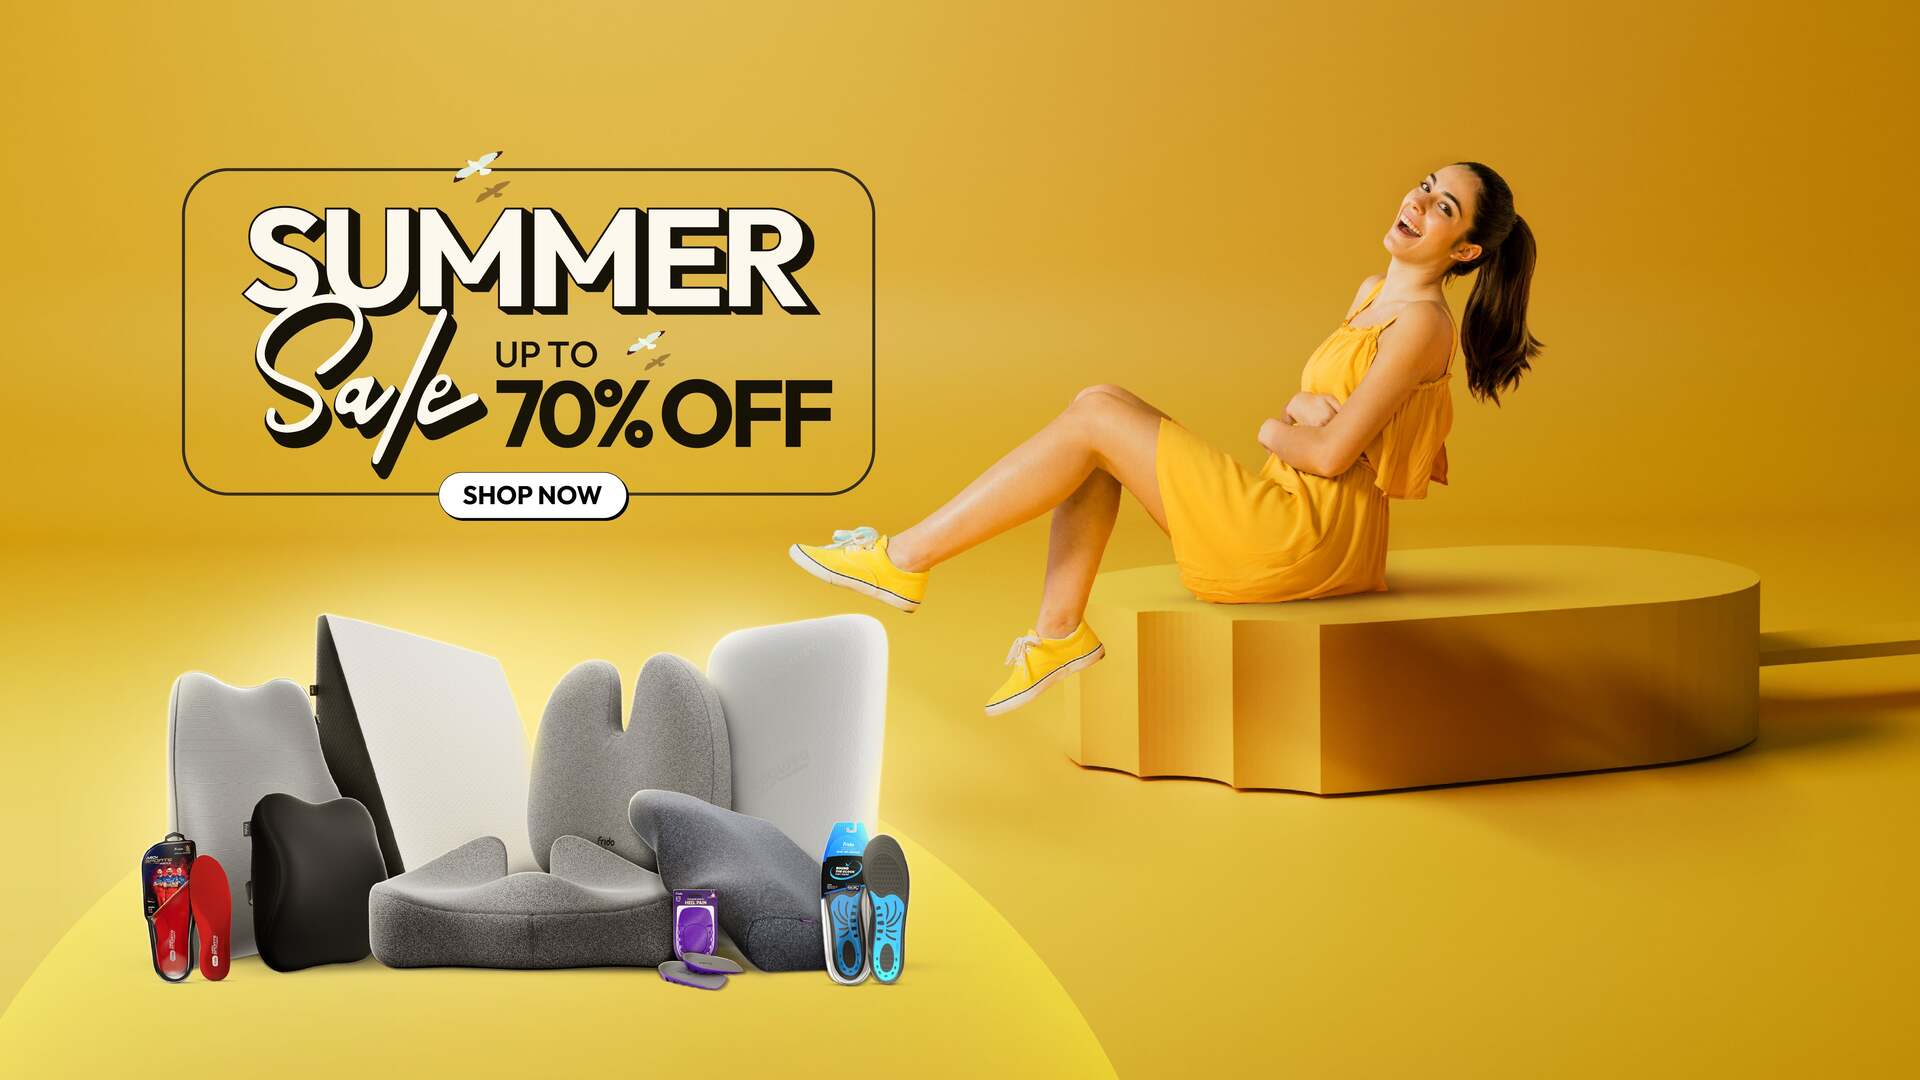 A promotional graphic with a woman in a yellow dress for a Summer Sale event, offering up to 70% off.